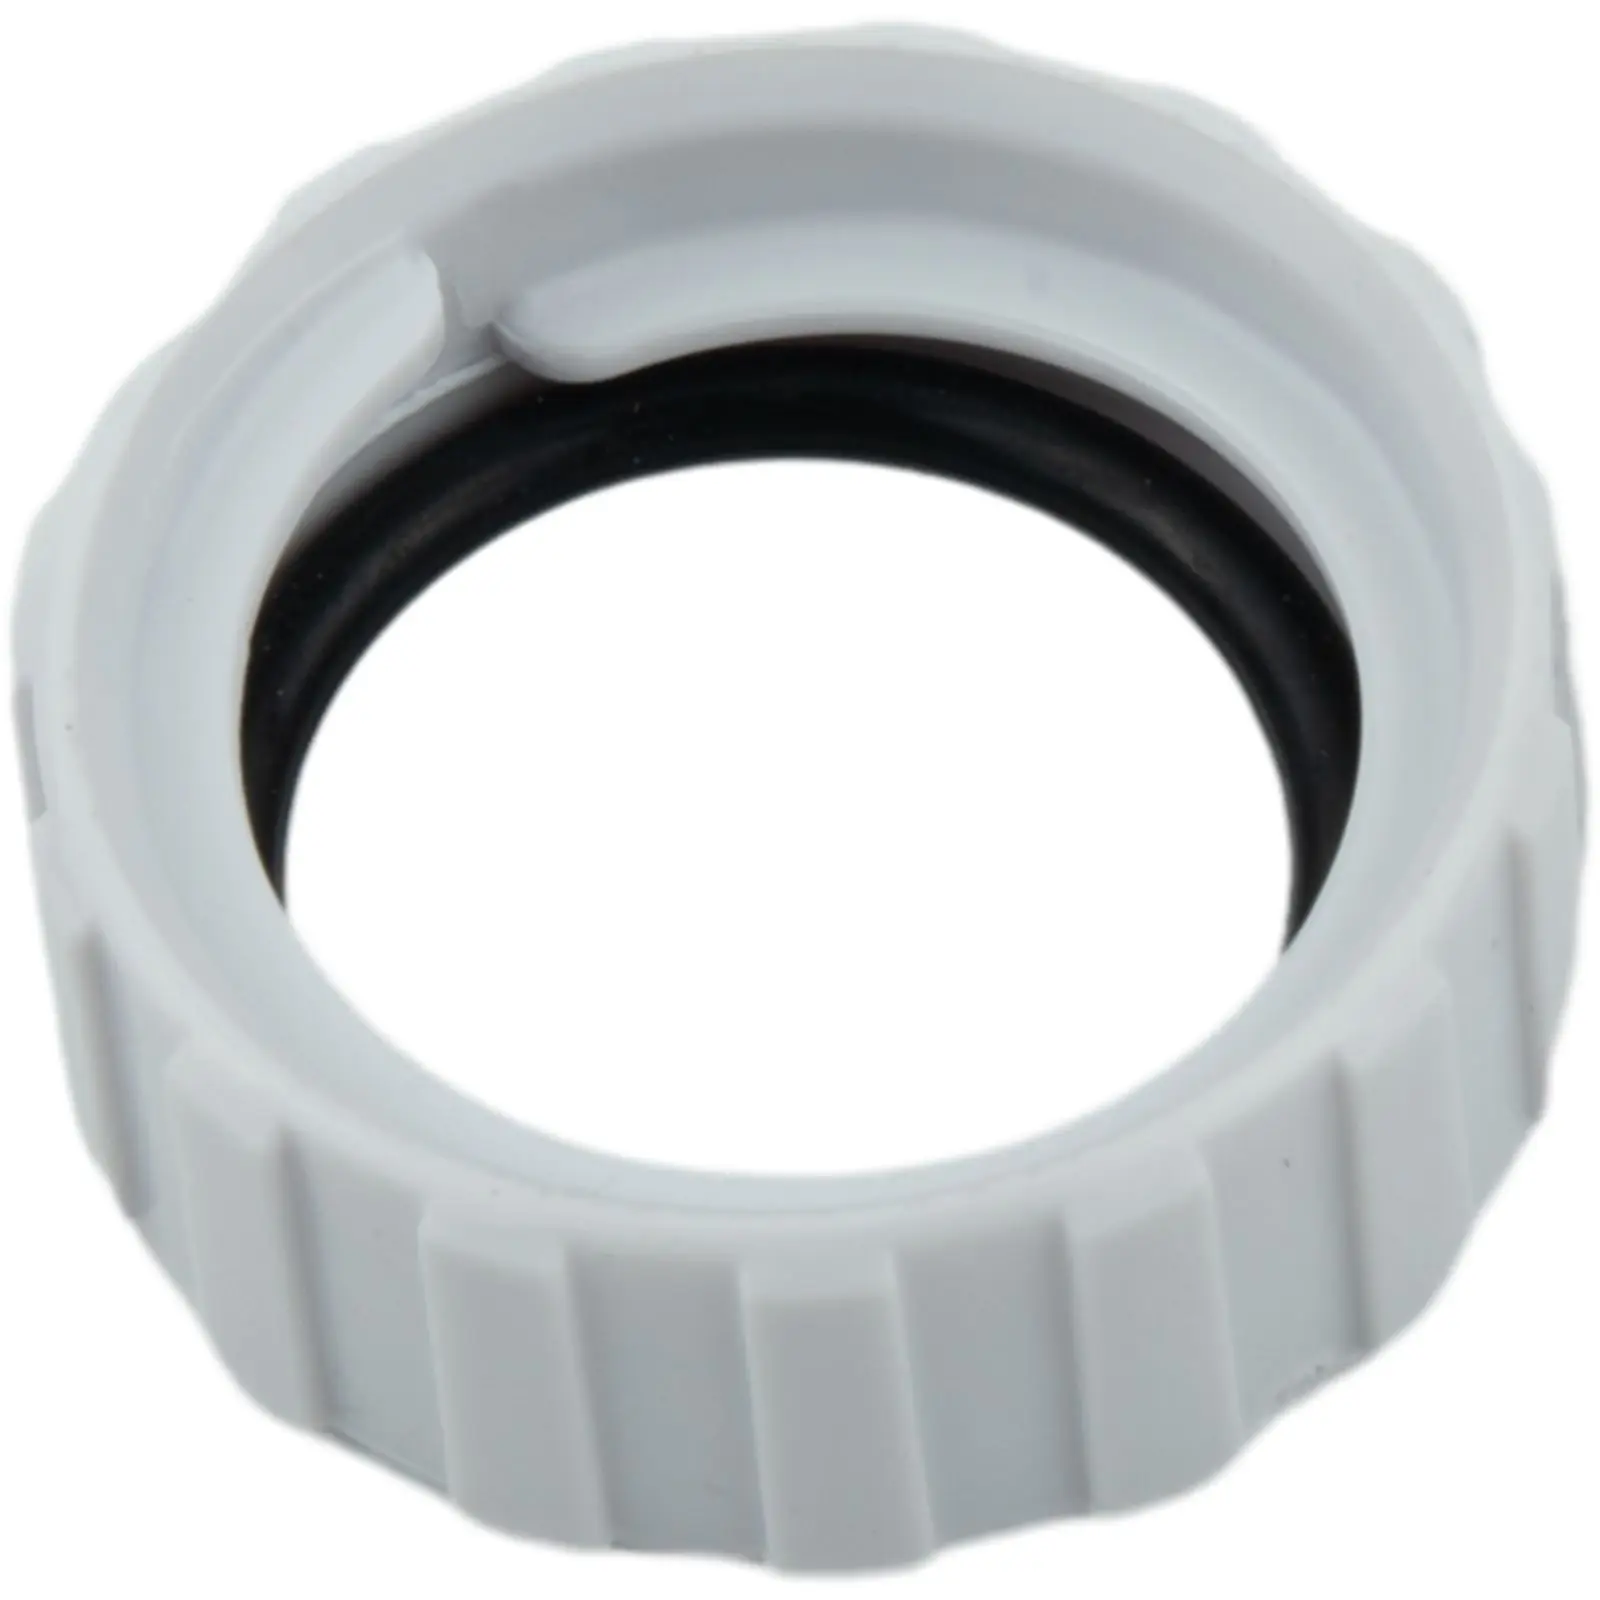 

Garden Tools Outdoor Living 1pc Hose Swivel 2Pcs Hose Nut 9-100-3109 Connects Quickly Easy To Use For Polaris 360